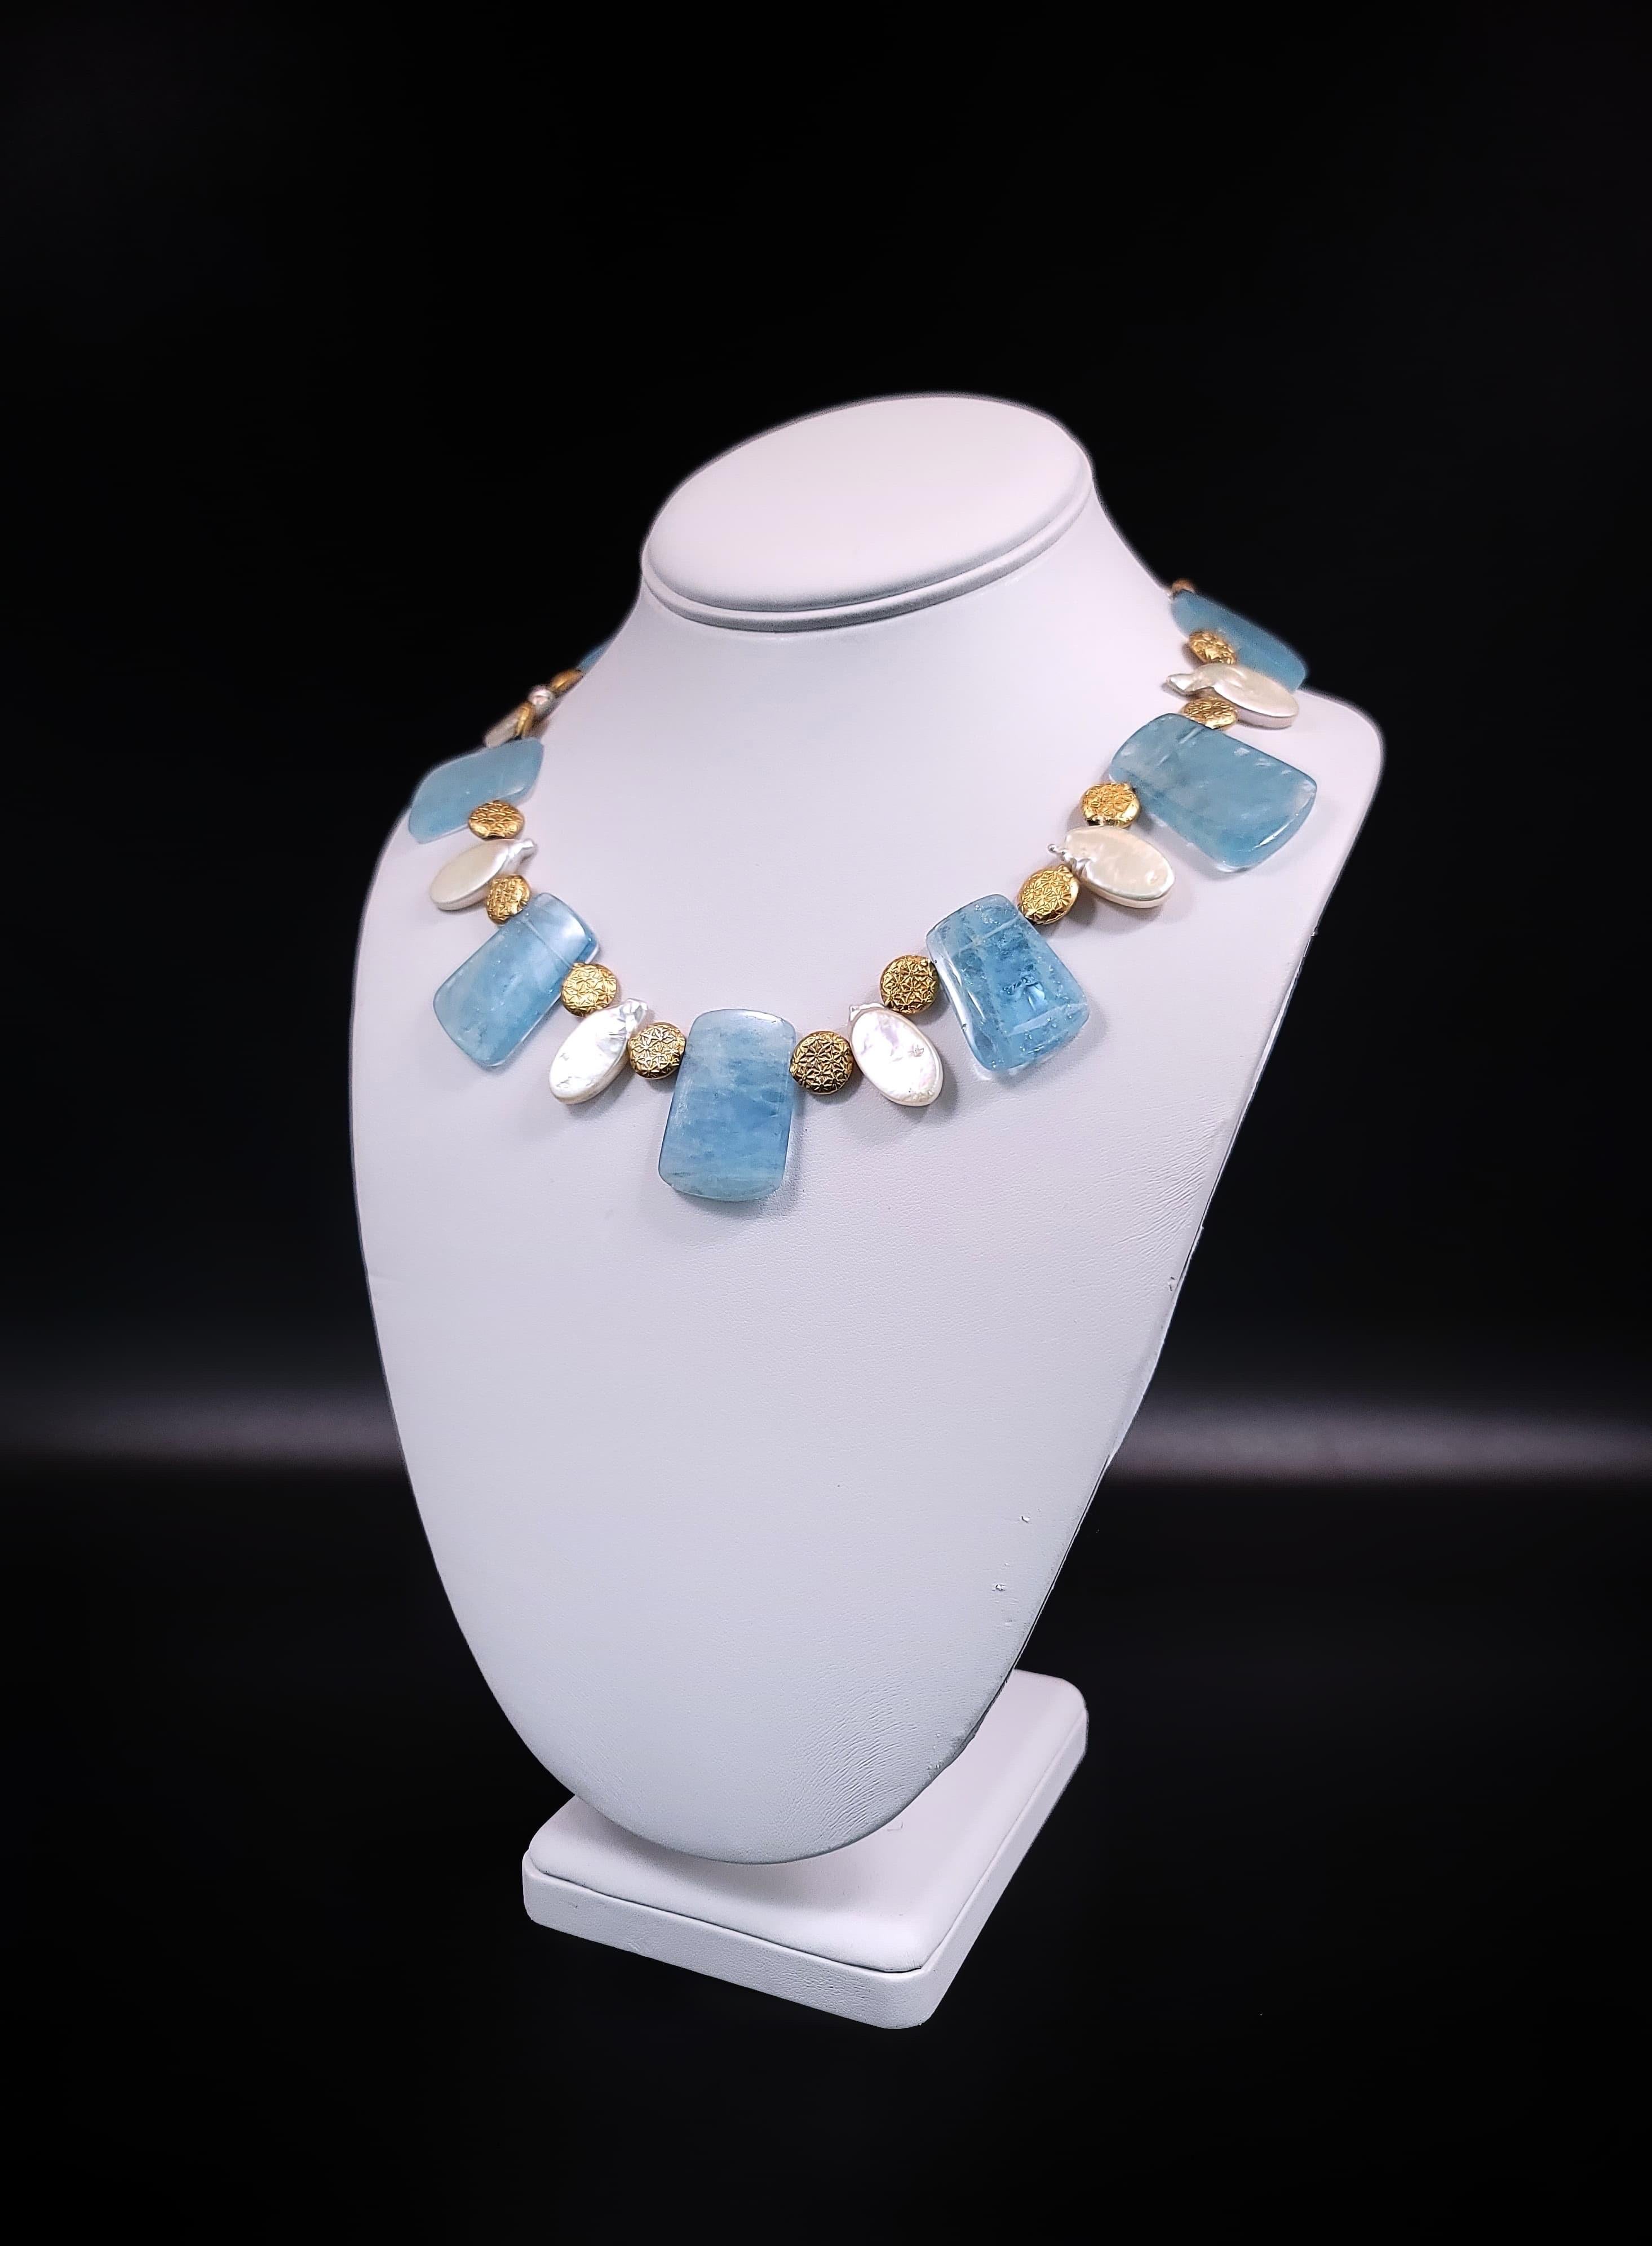 Exquisite Azure Blue Necklace: Uniquely Yours

Unveil the pinnacle of elegance with our one-of-a-kind single-strand necklace, adorned with finely sliced azure blue beads, each measuring 7 (2x3'') tabs. These beads possess a translucent quality akin